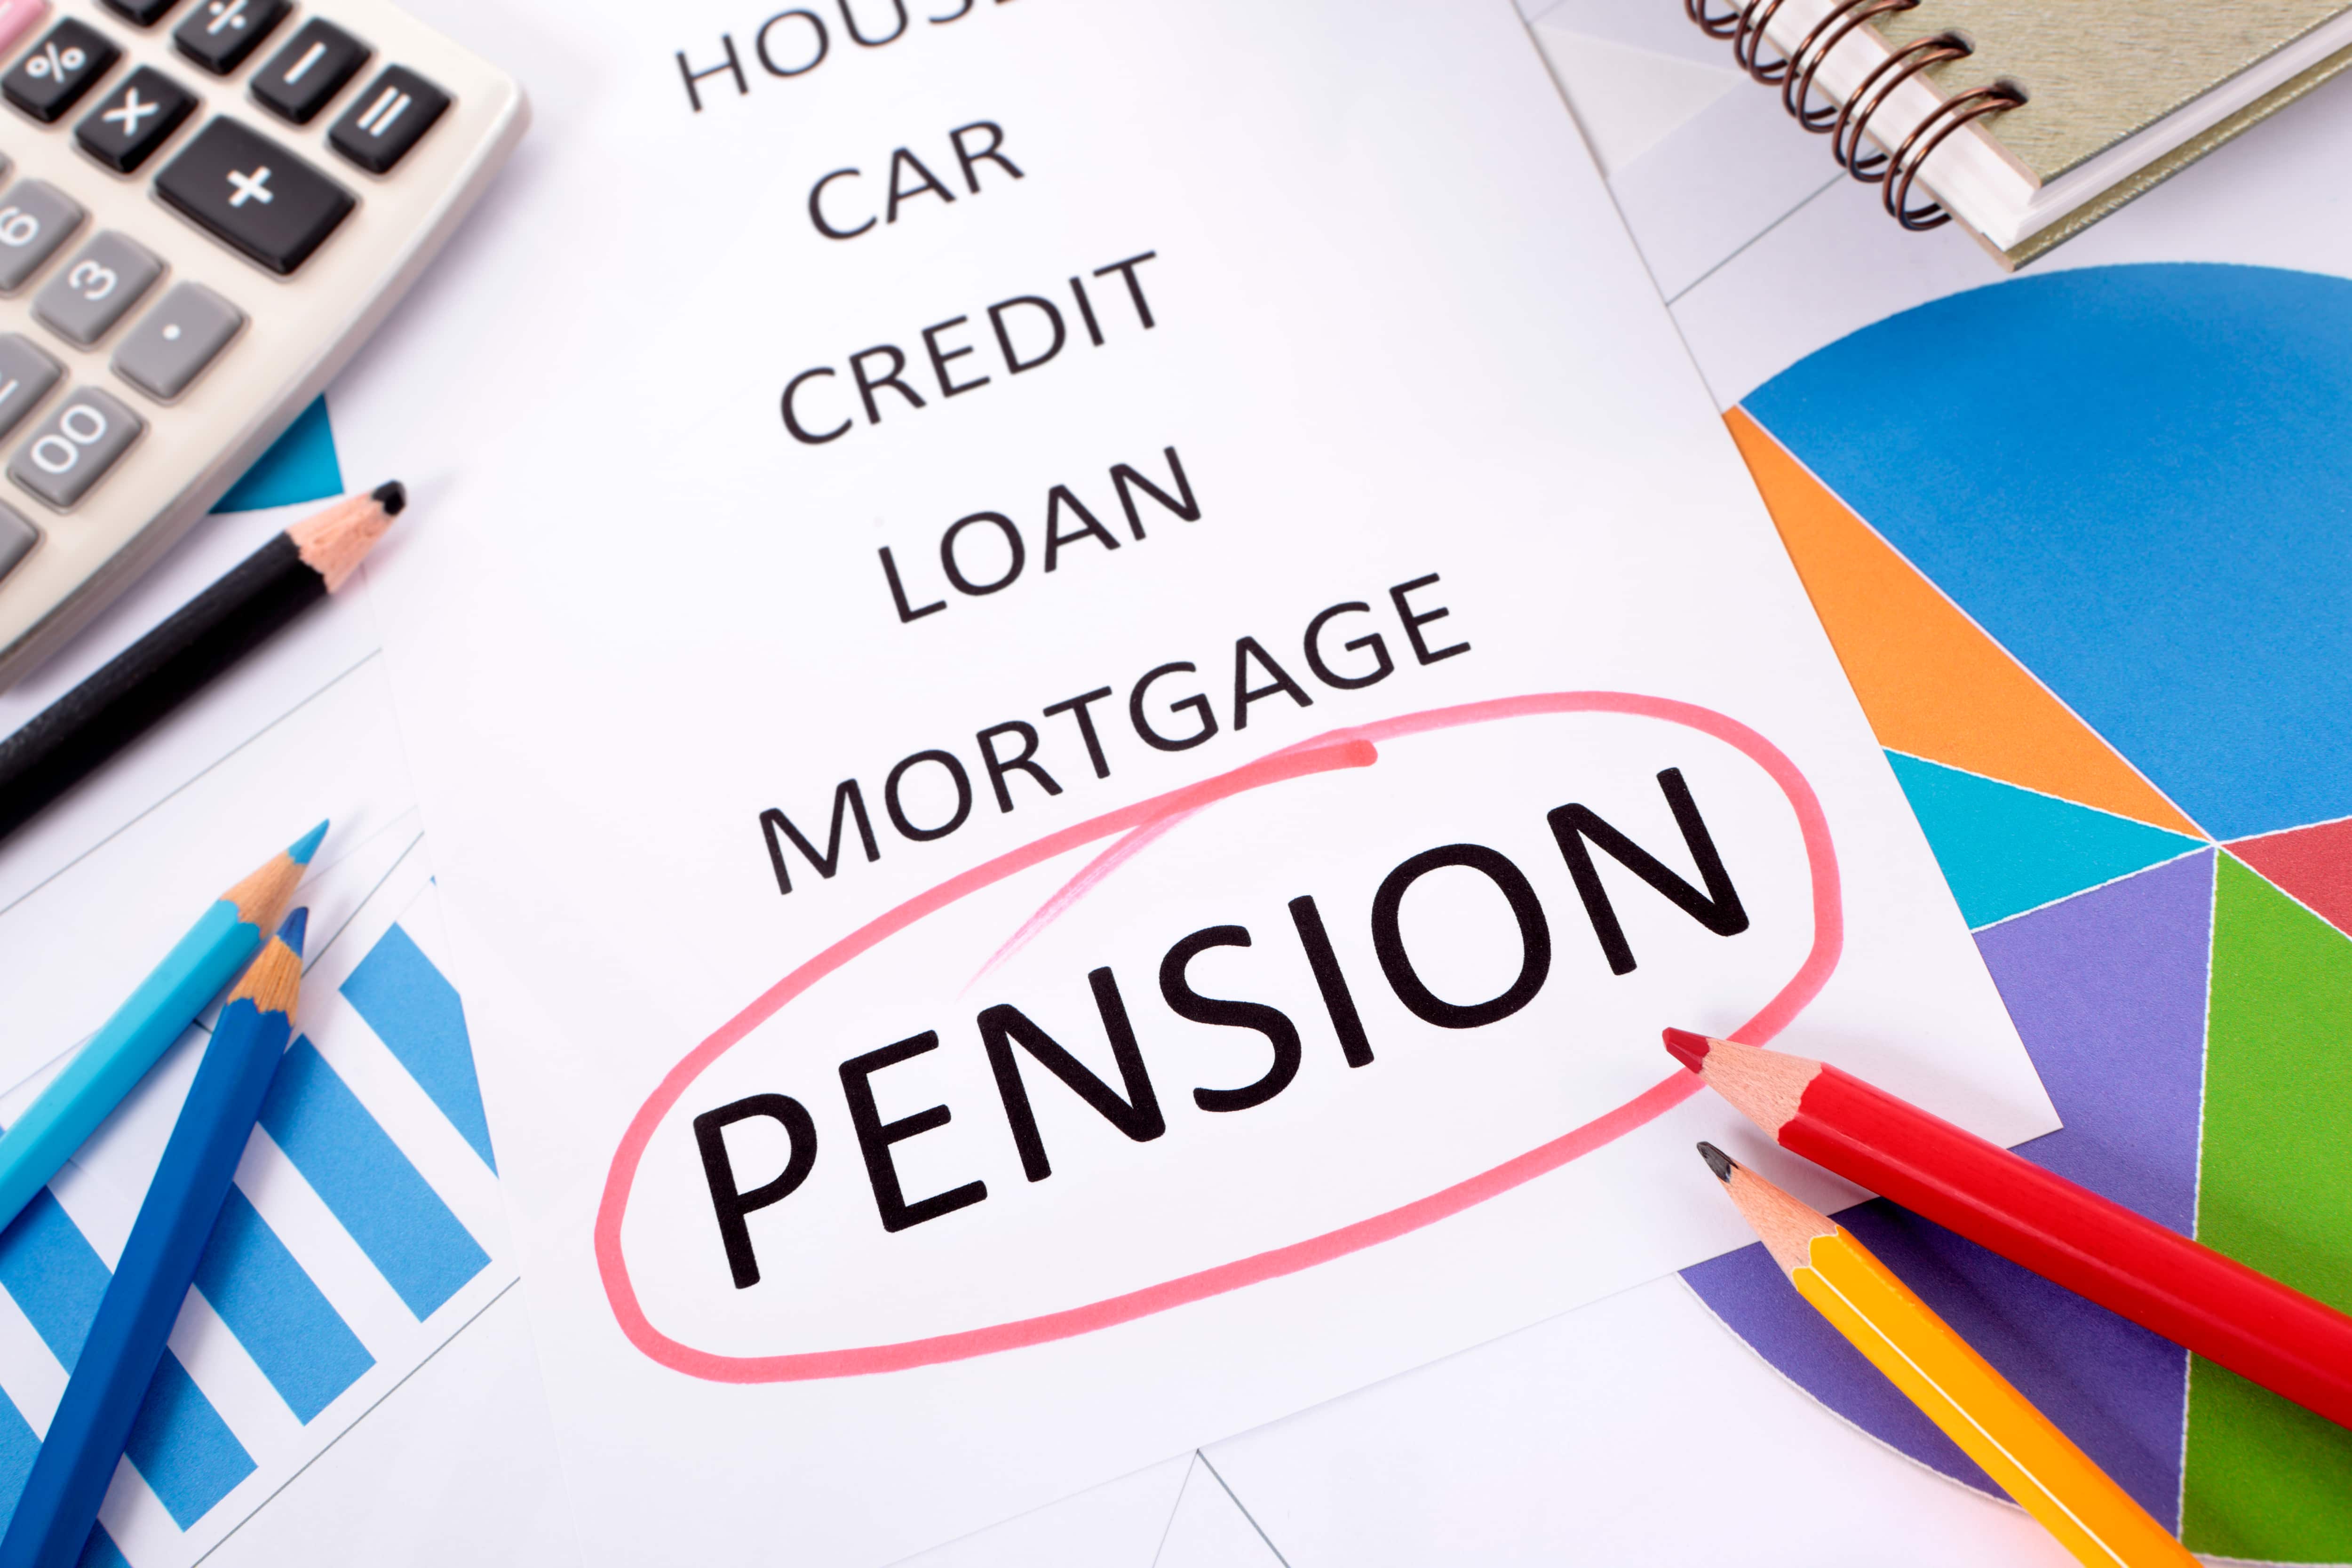 Govt has no plans of returning to the Old Pension Scheme: Finance Ministry sources